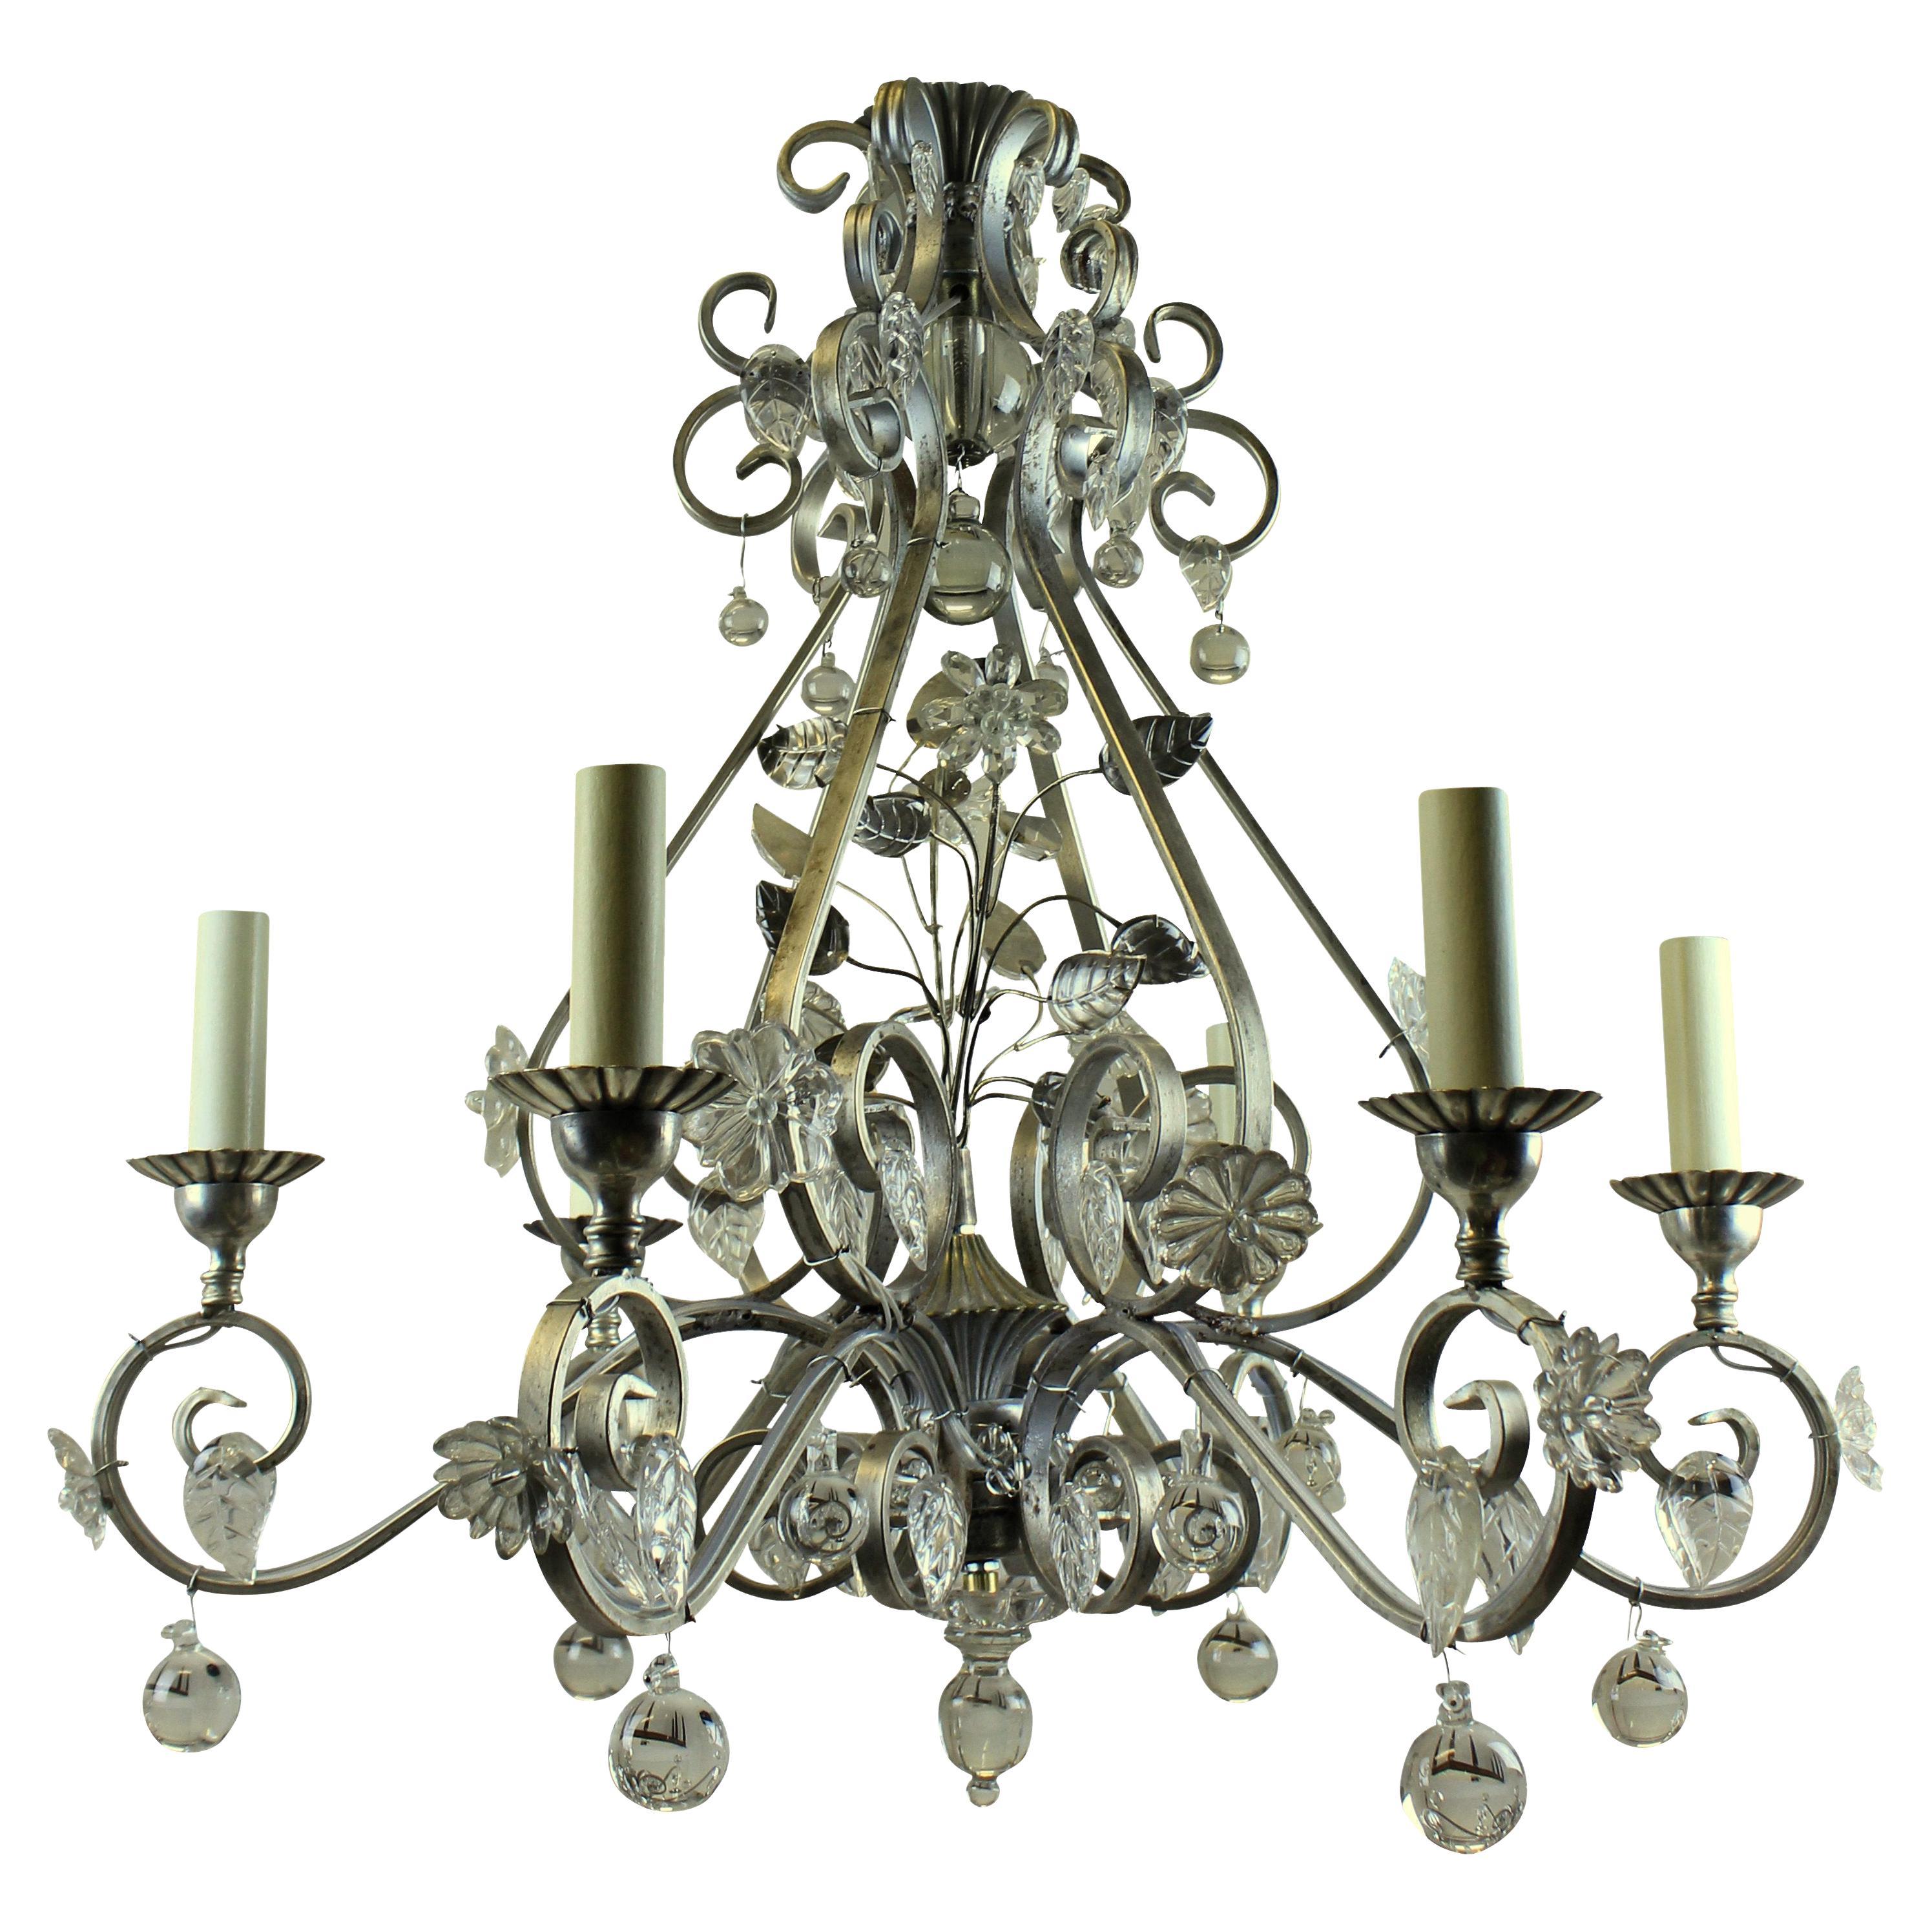 Baguès Style Chandelier with Flowers and Leaves in Glass